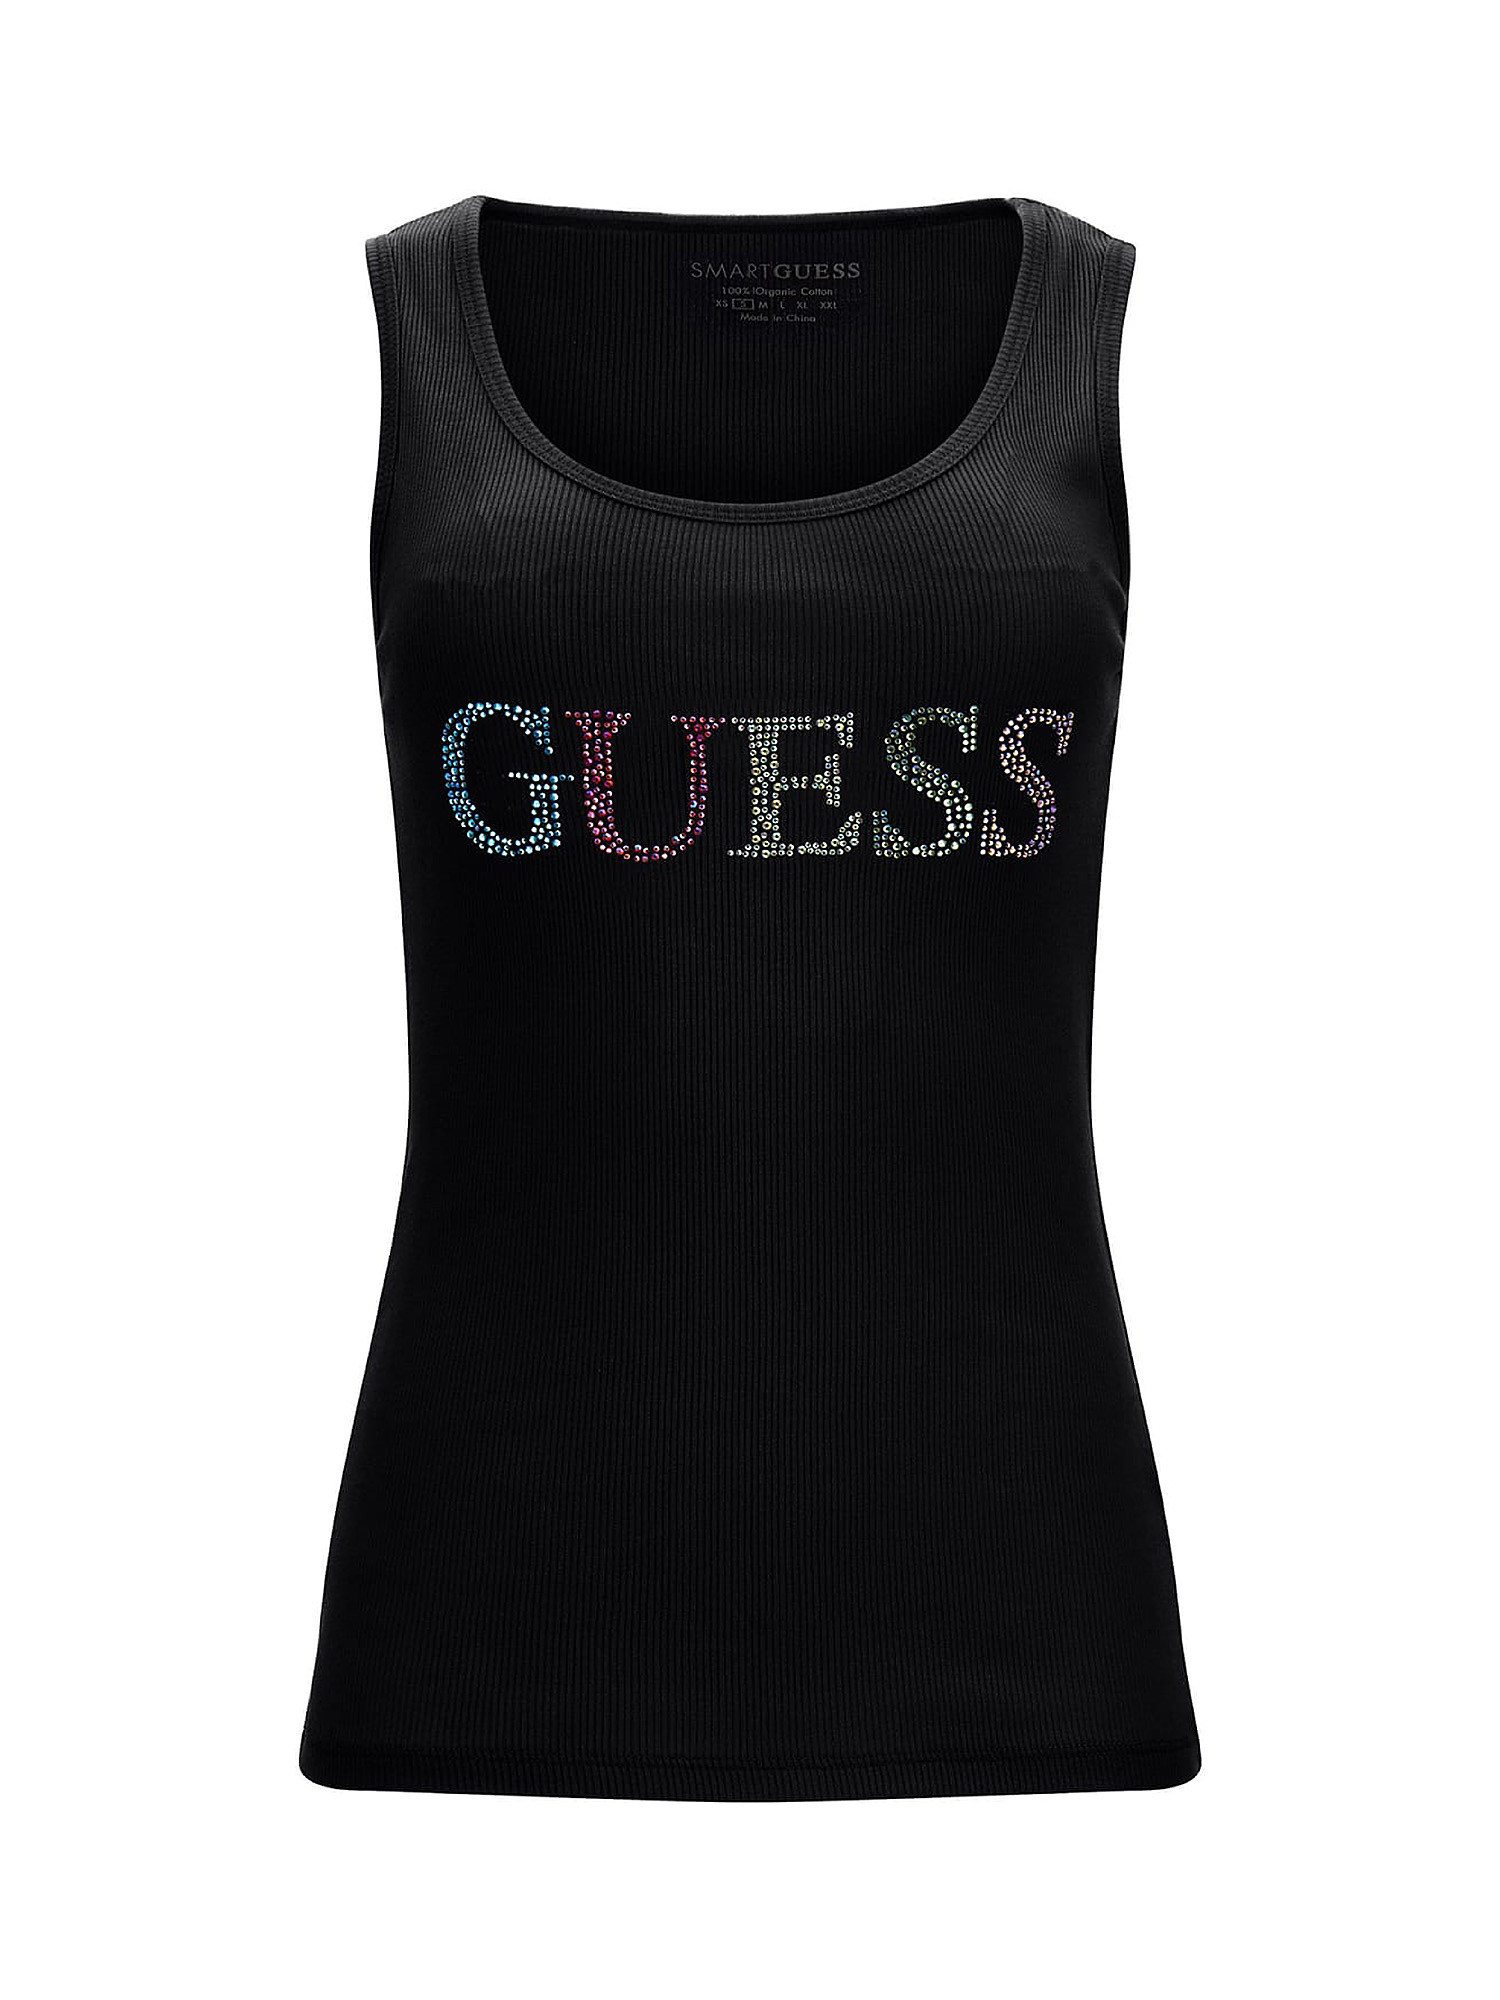 GUESS - Canotta in cotone con logo, Nero, large image number 0